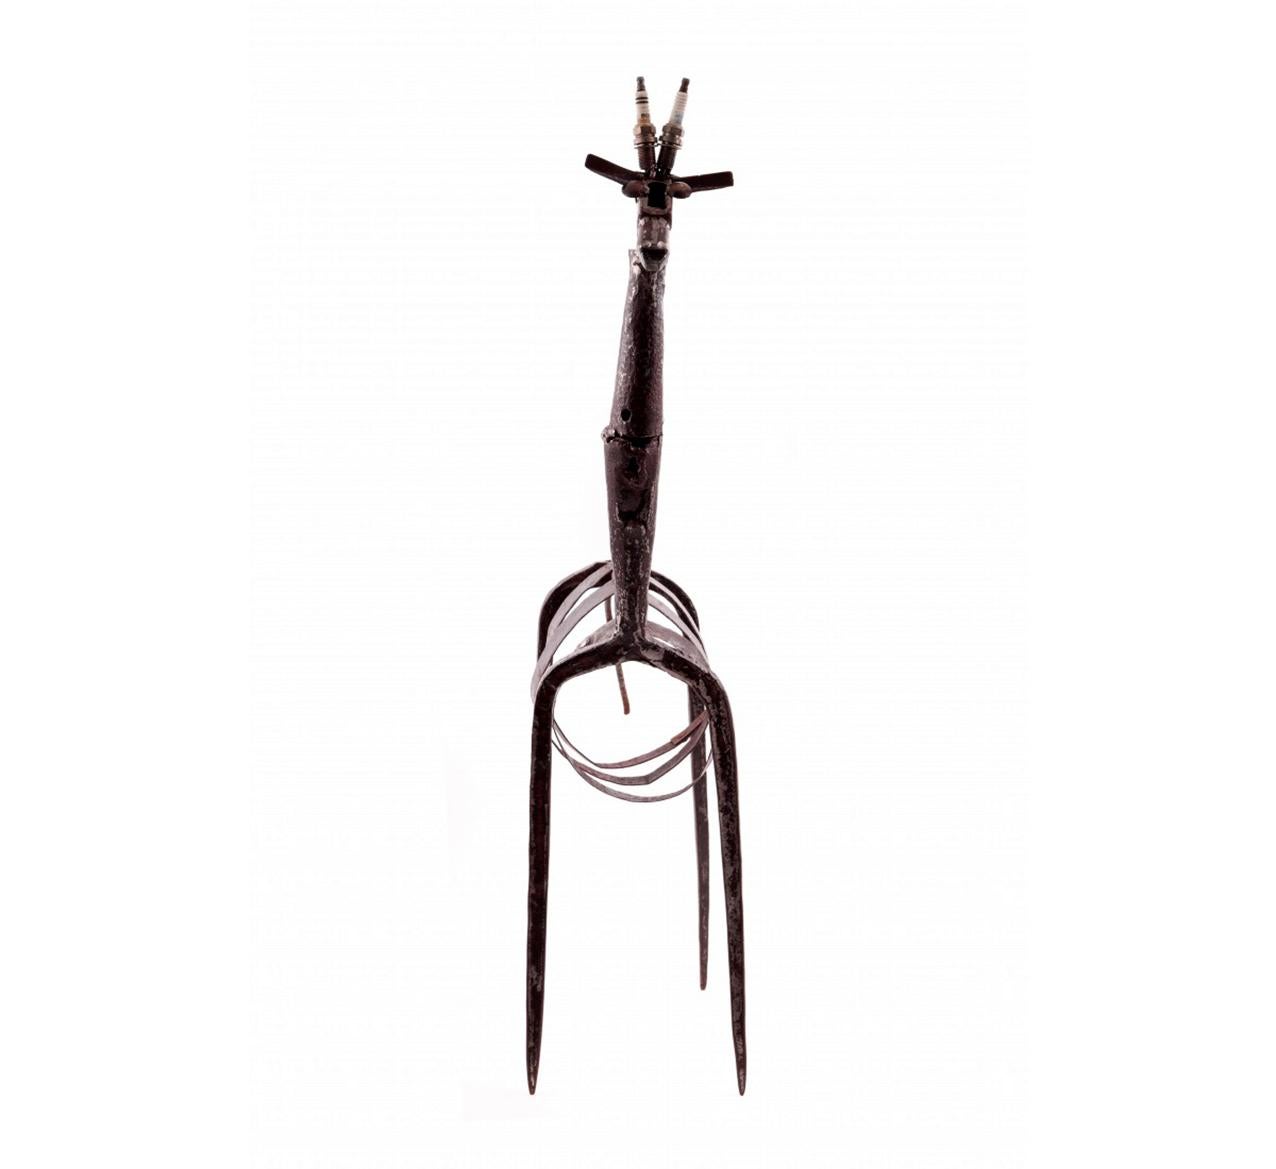 Giraffe by José Jerónimo single piece of art
Iron sculpture with use of tools and other objects
Signed

Measures: 81 x 41 x 15 cm.
Private collection.